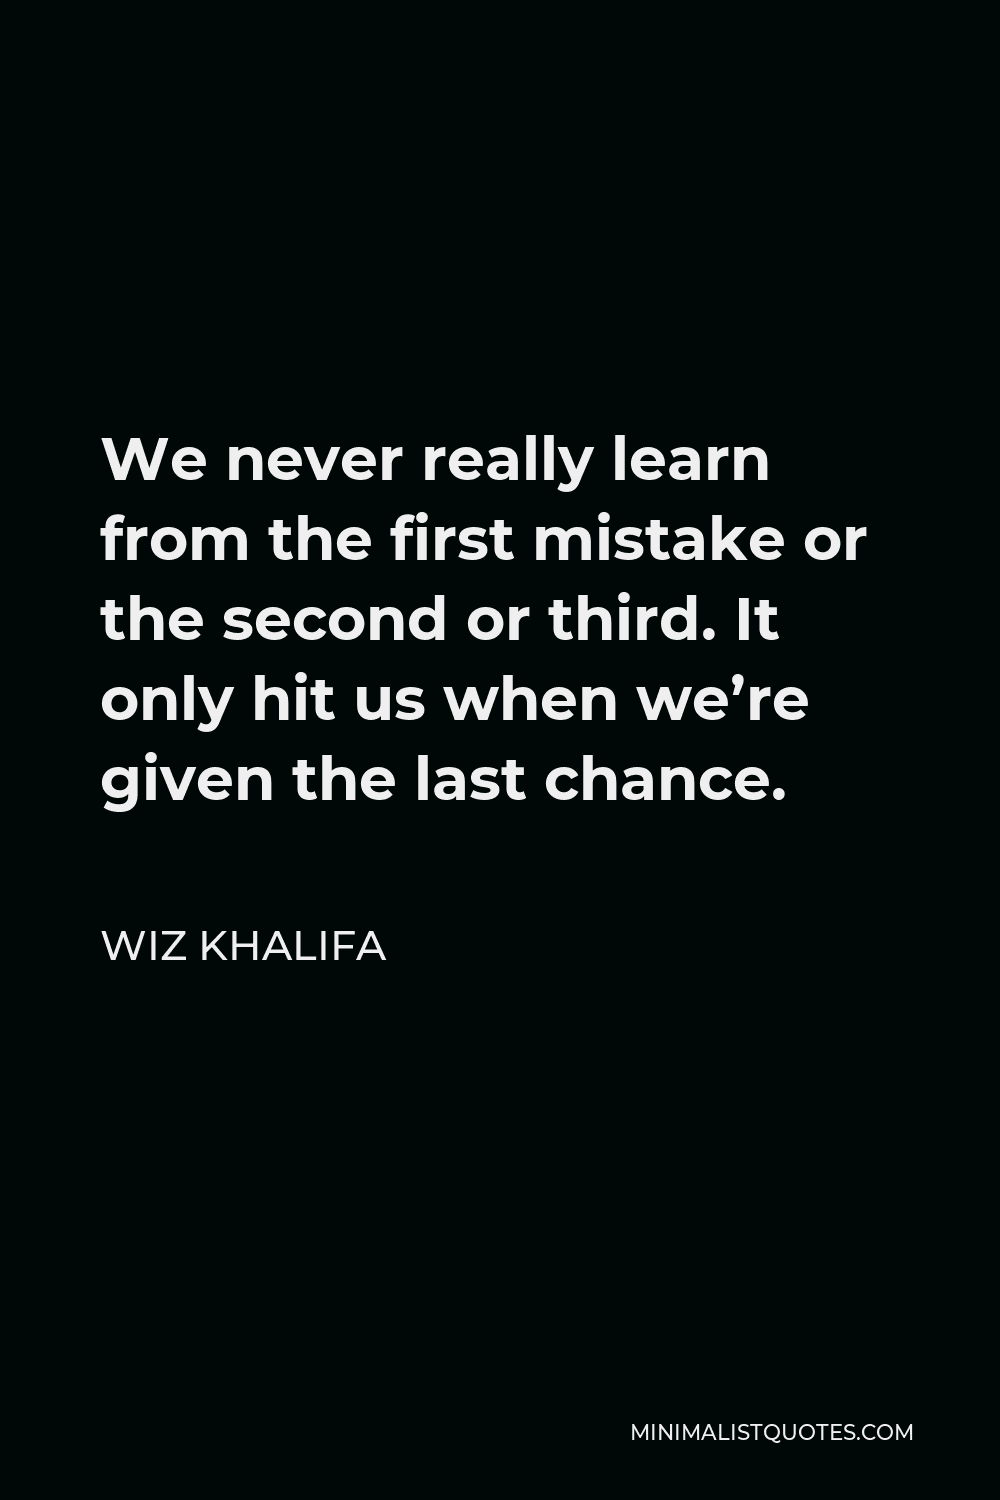 Wiz Khalifa Quote - We never really learn from the first mistake or the second or third. It only hit us when we’re given the last chance.